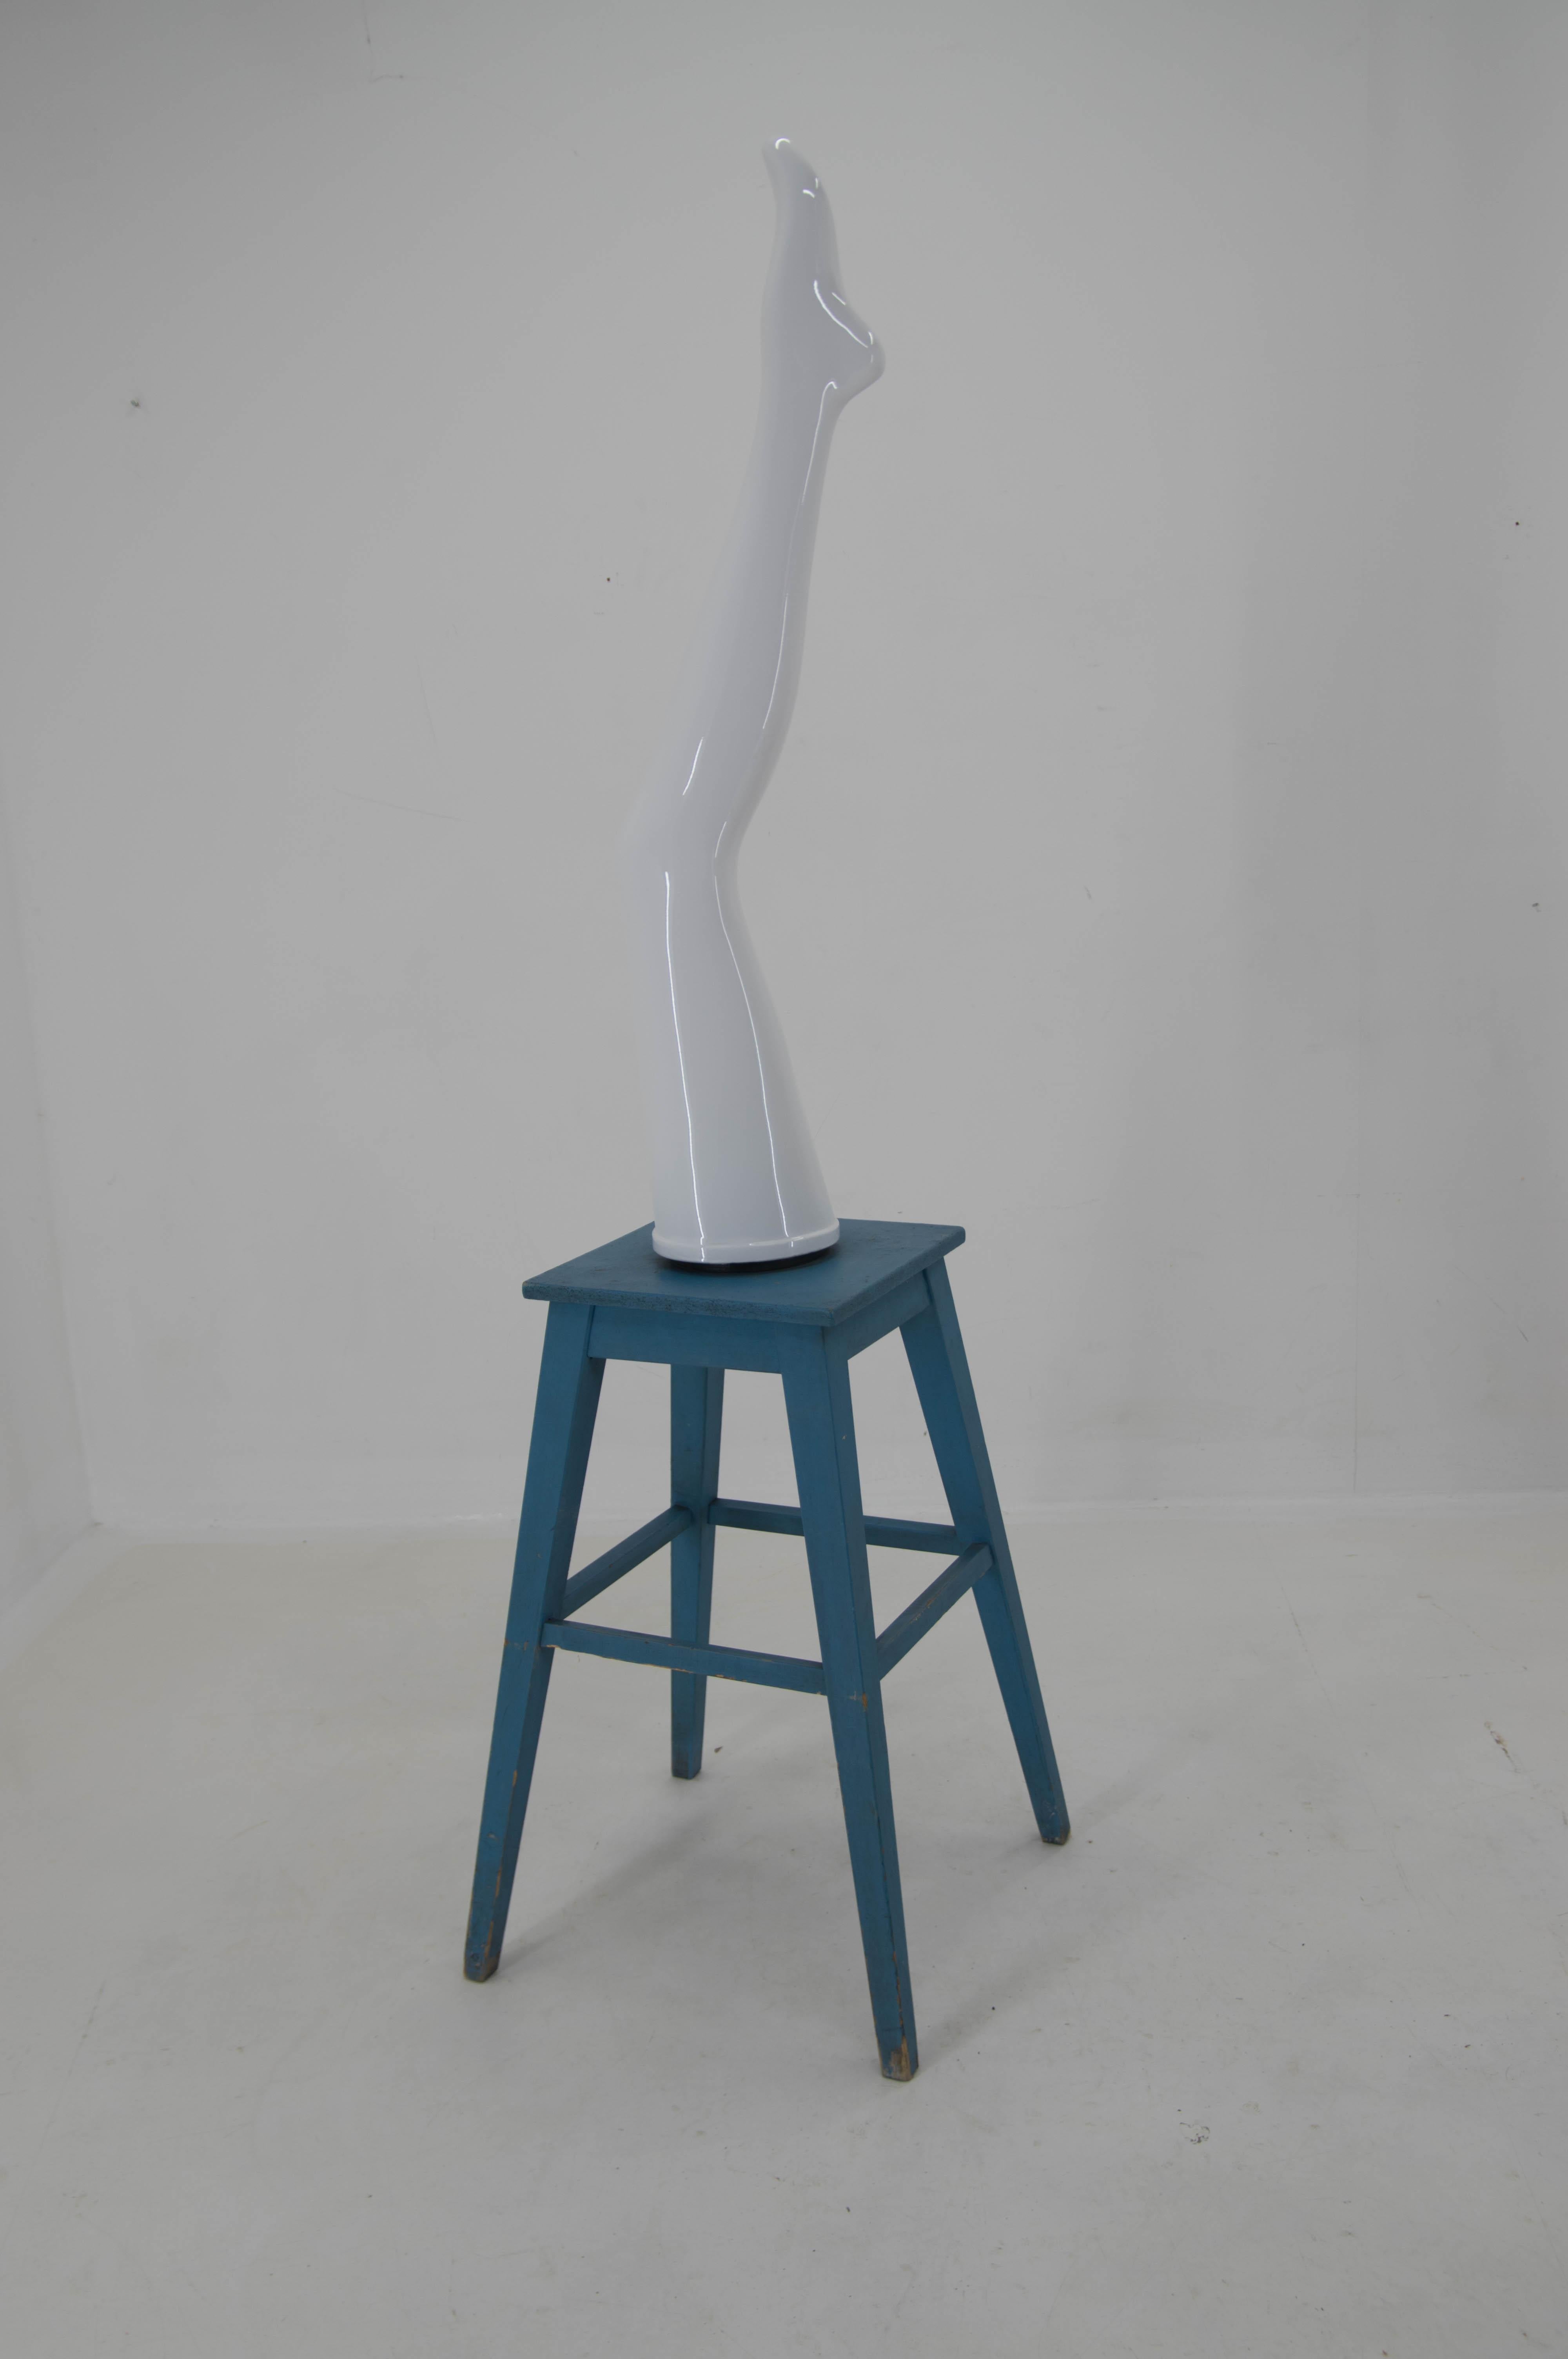 Swivel ladies leg on the stool used as a model for showing tights in textile factory in Czechoslovakia.
Stand with age patina.
Leg has new high gloss white finish.
Nice decorative object.
 